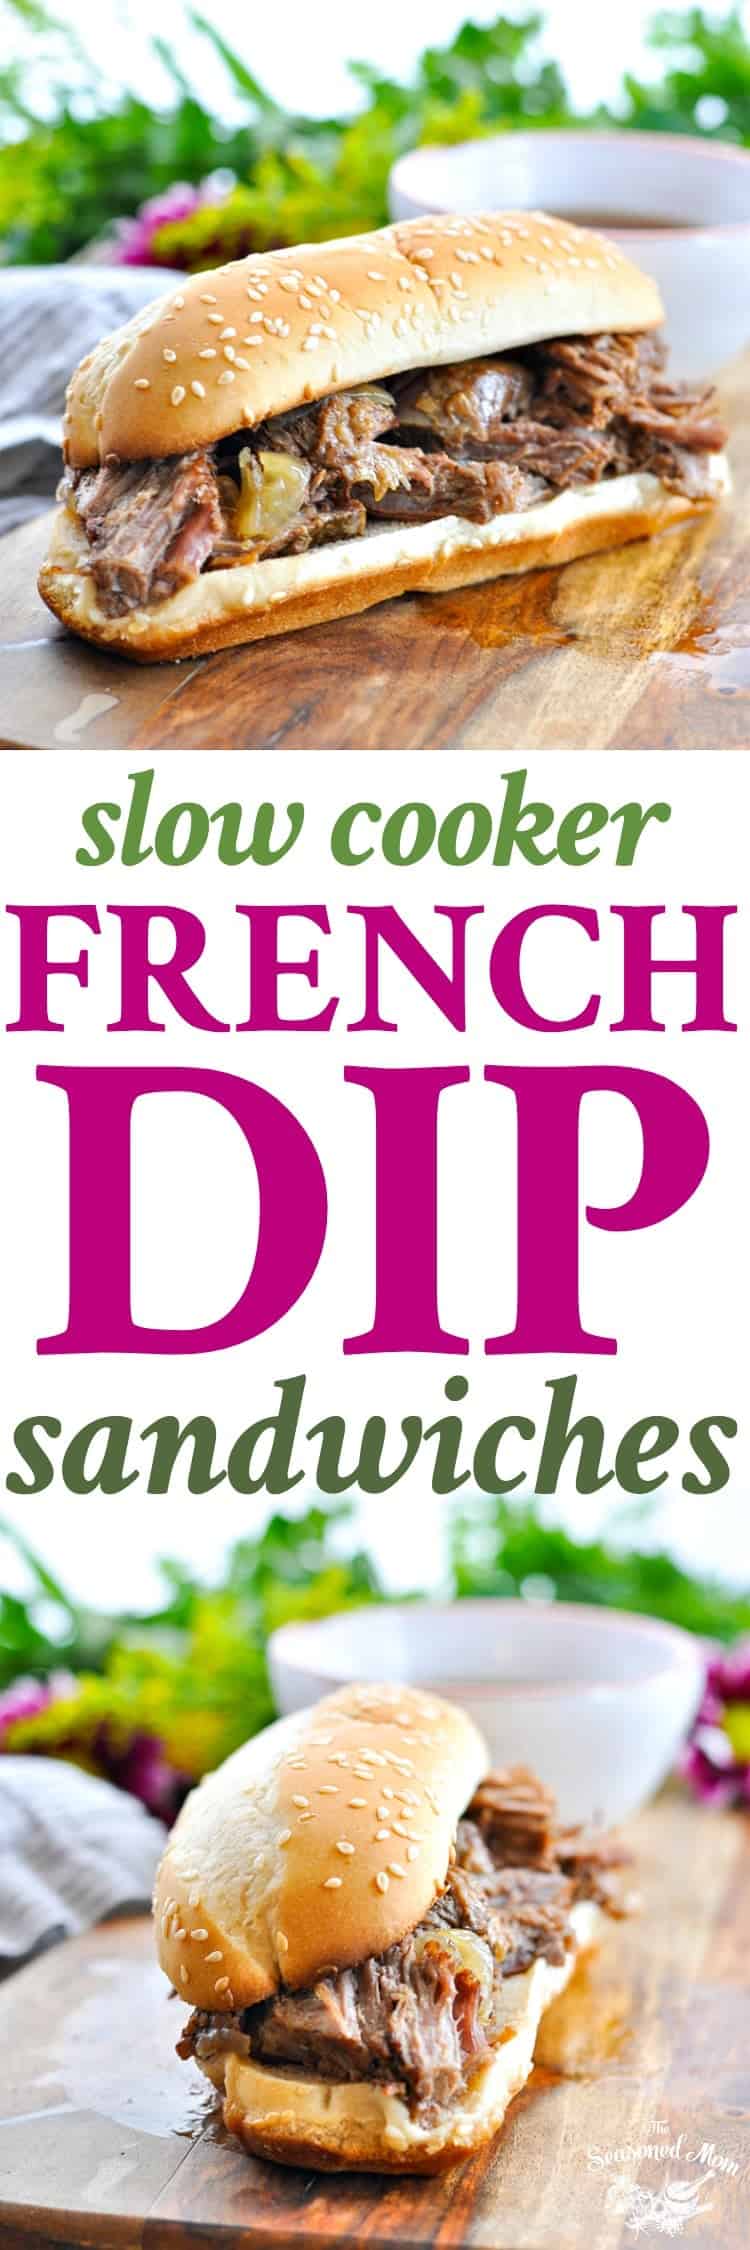 Slow Cooker French Dip Sandwiches - The Seasoned Mom